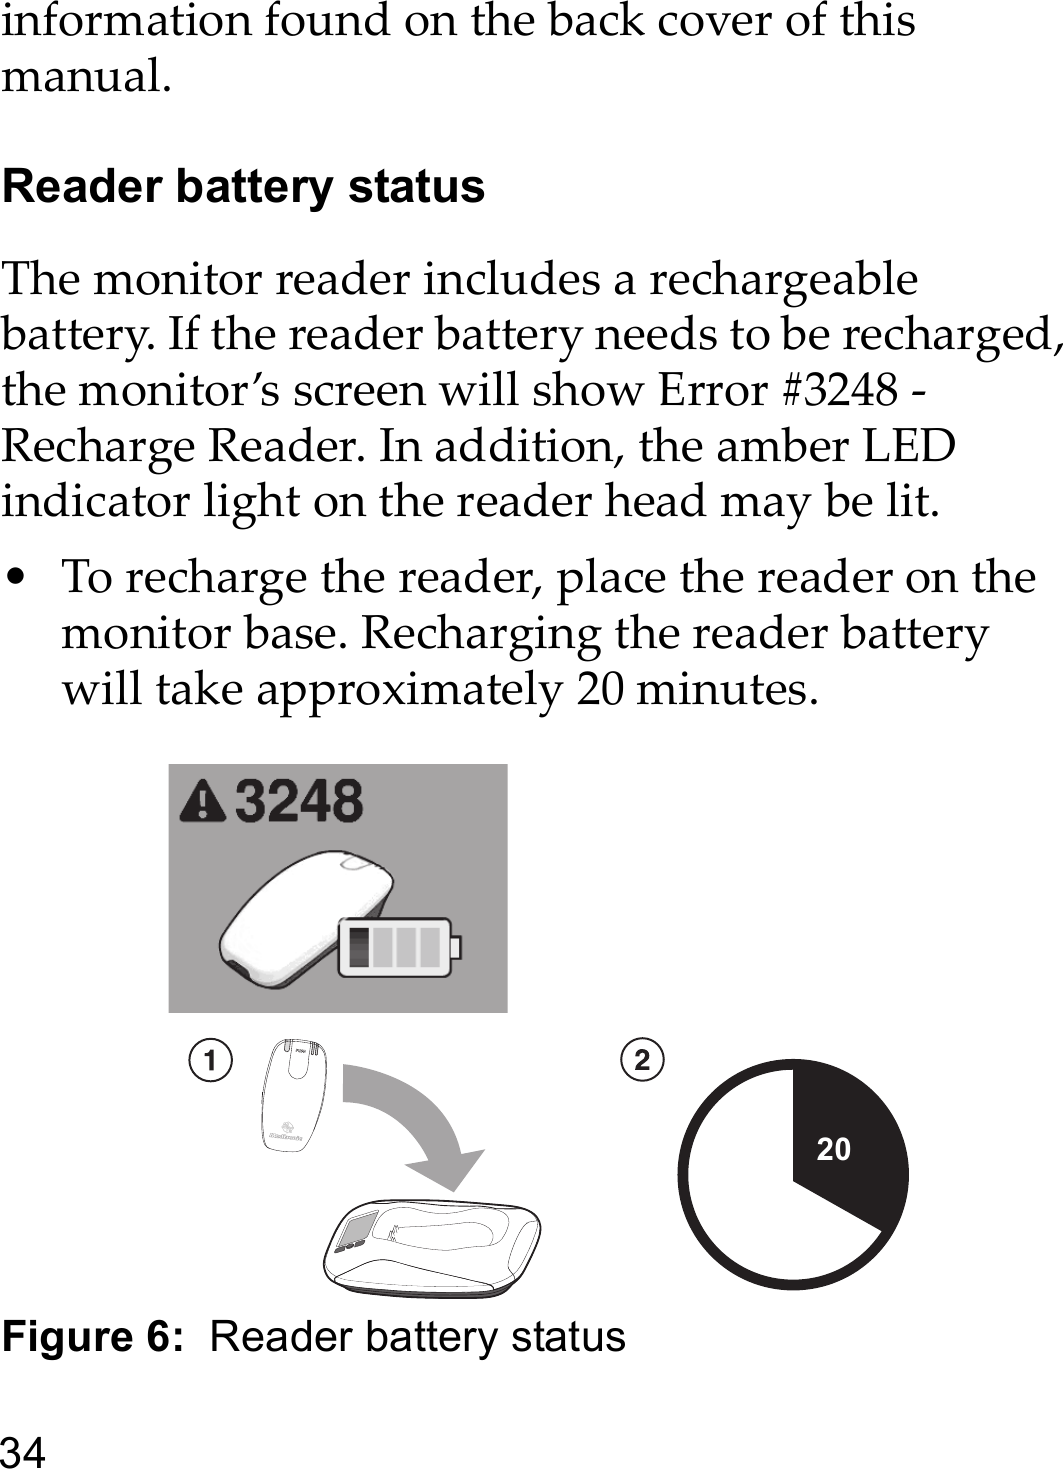 34information found on the back cover of this manual. Reader battery statusThe monitor reader includes a rechargeable battery. If the reader battery needs to be recharged, the monitor’s screen will show Error #3248 - Recharge Reader. In addition, the amber LED indicator light on the reader head may be lit.• To recharge the reader, place the reader on the monitor base. Recharging the reader battery will take approximately 20 minutes.Figure 6:  Reader battery status20 